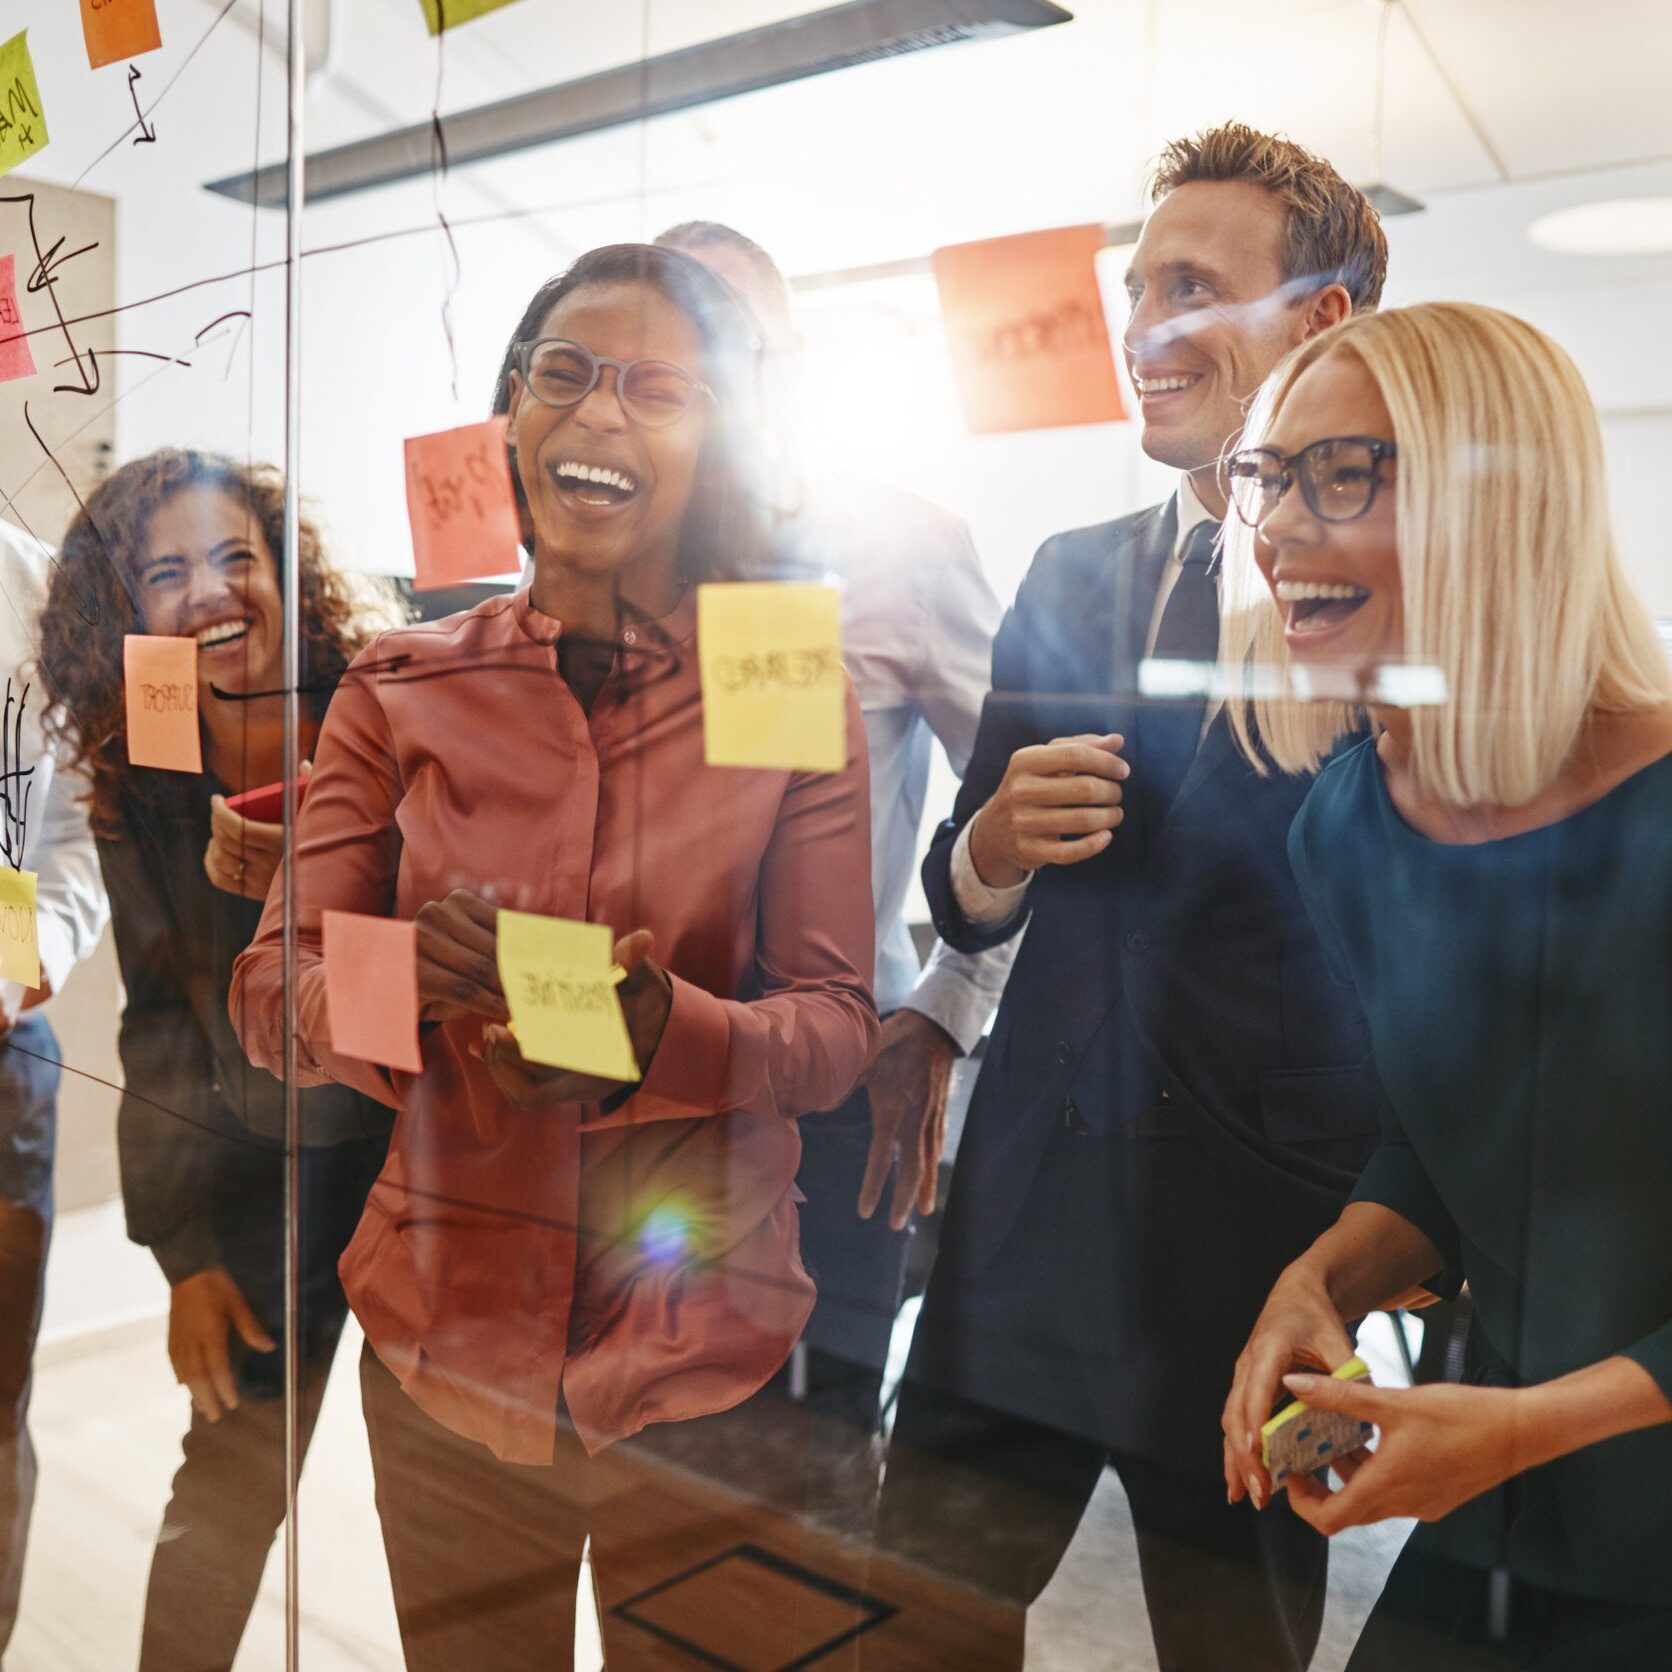 Laughing group of diverse businesspeople having a brainstorming session together with sticky notes in an office